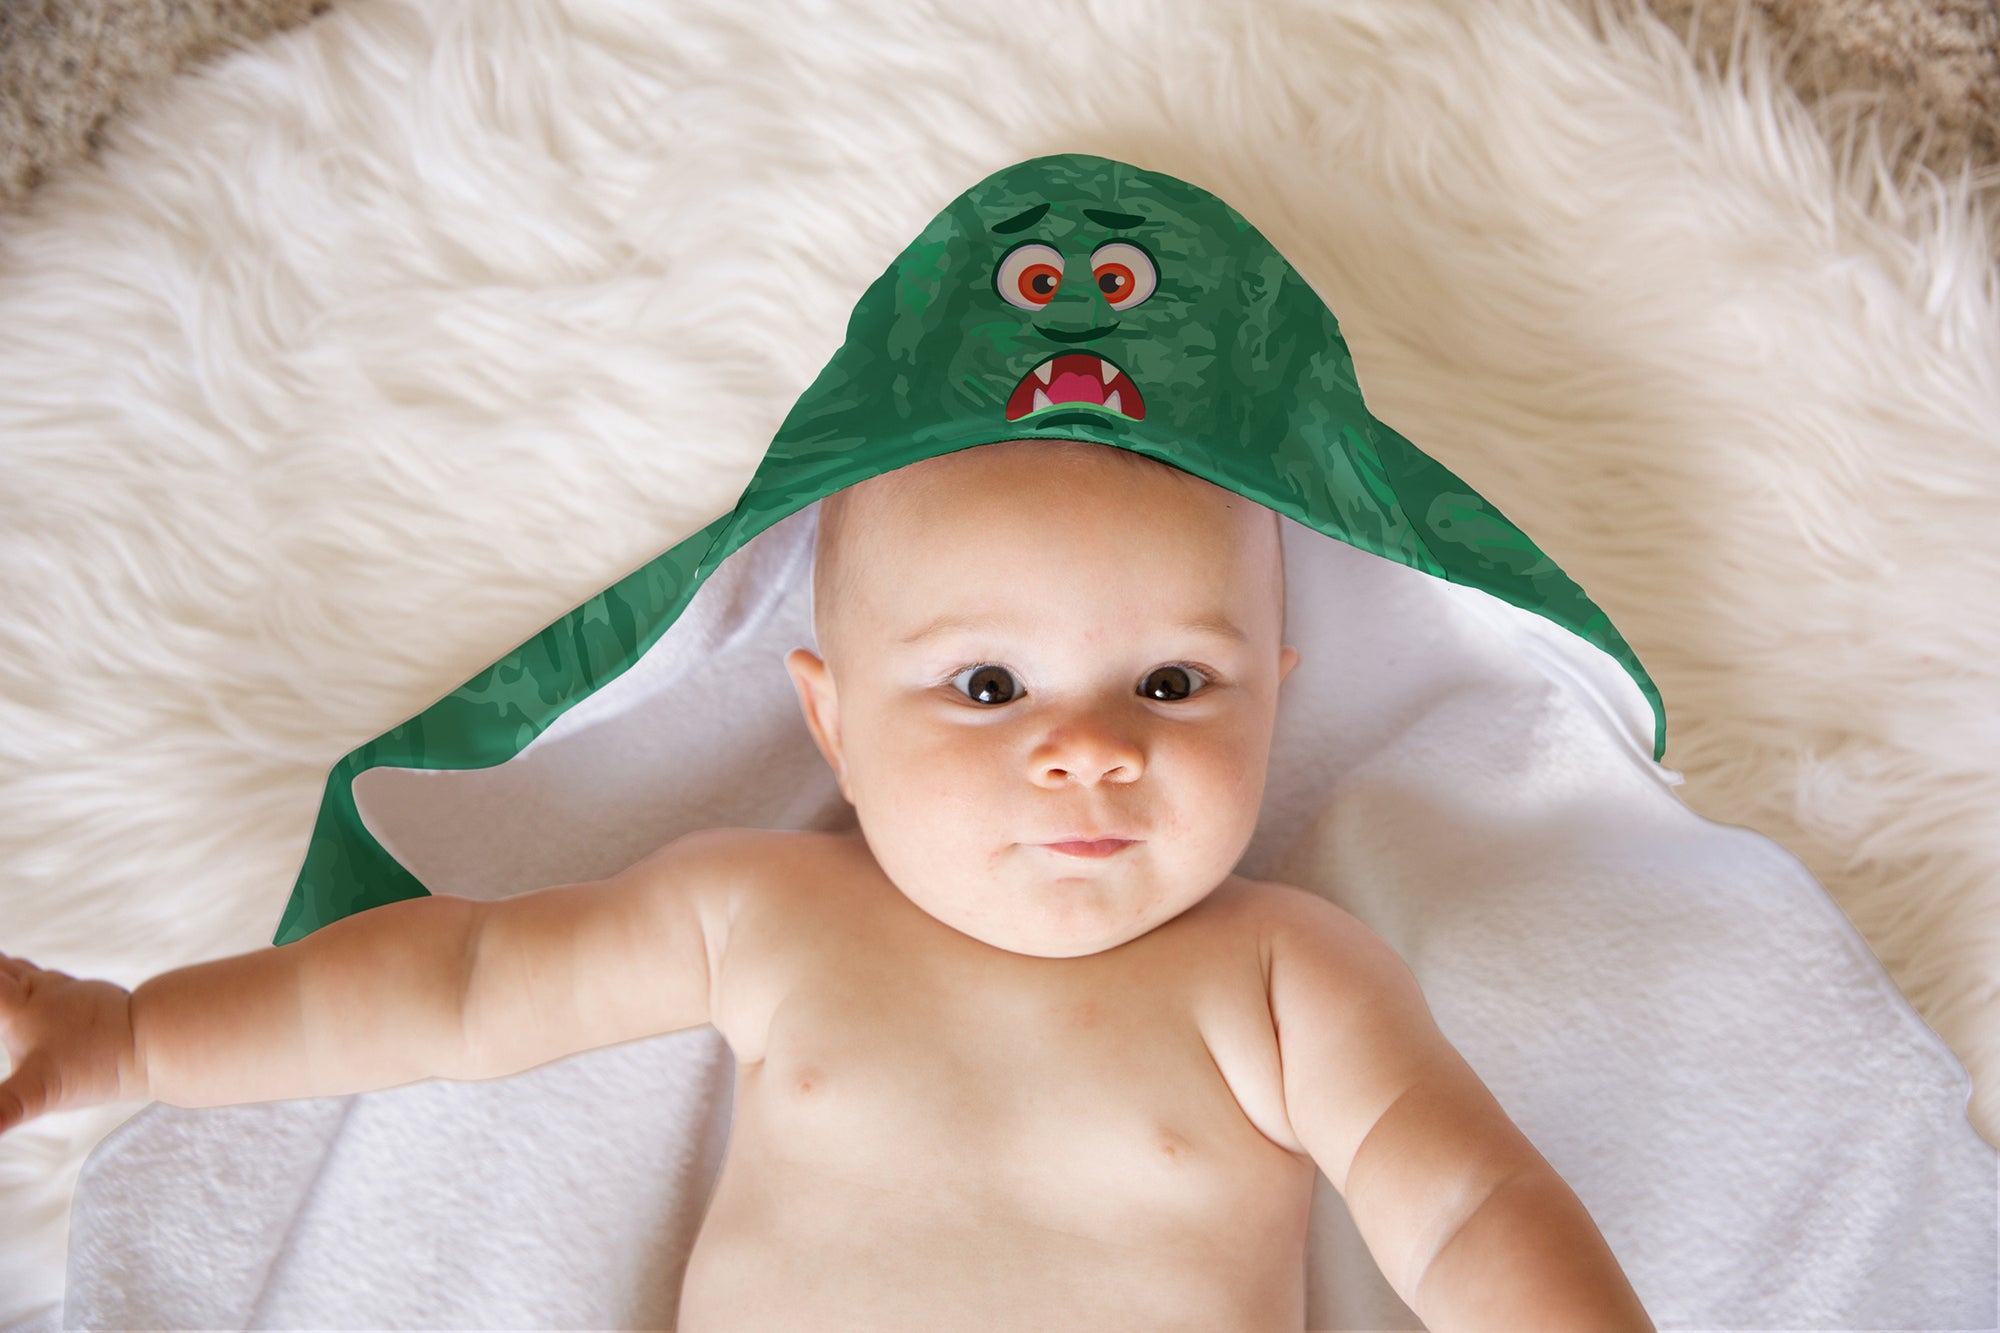 Buy this Dark Green Monster Soft and Absorbent Hooded Baby Towel